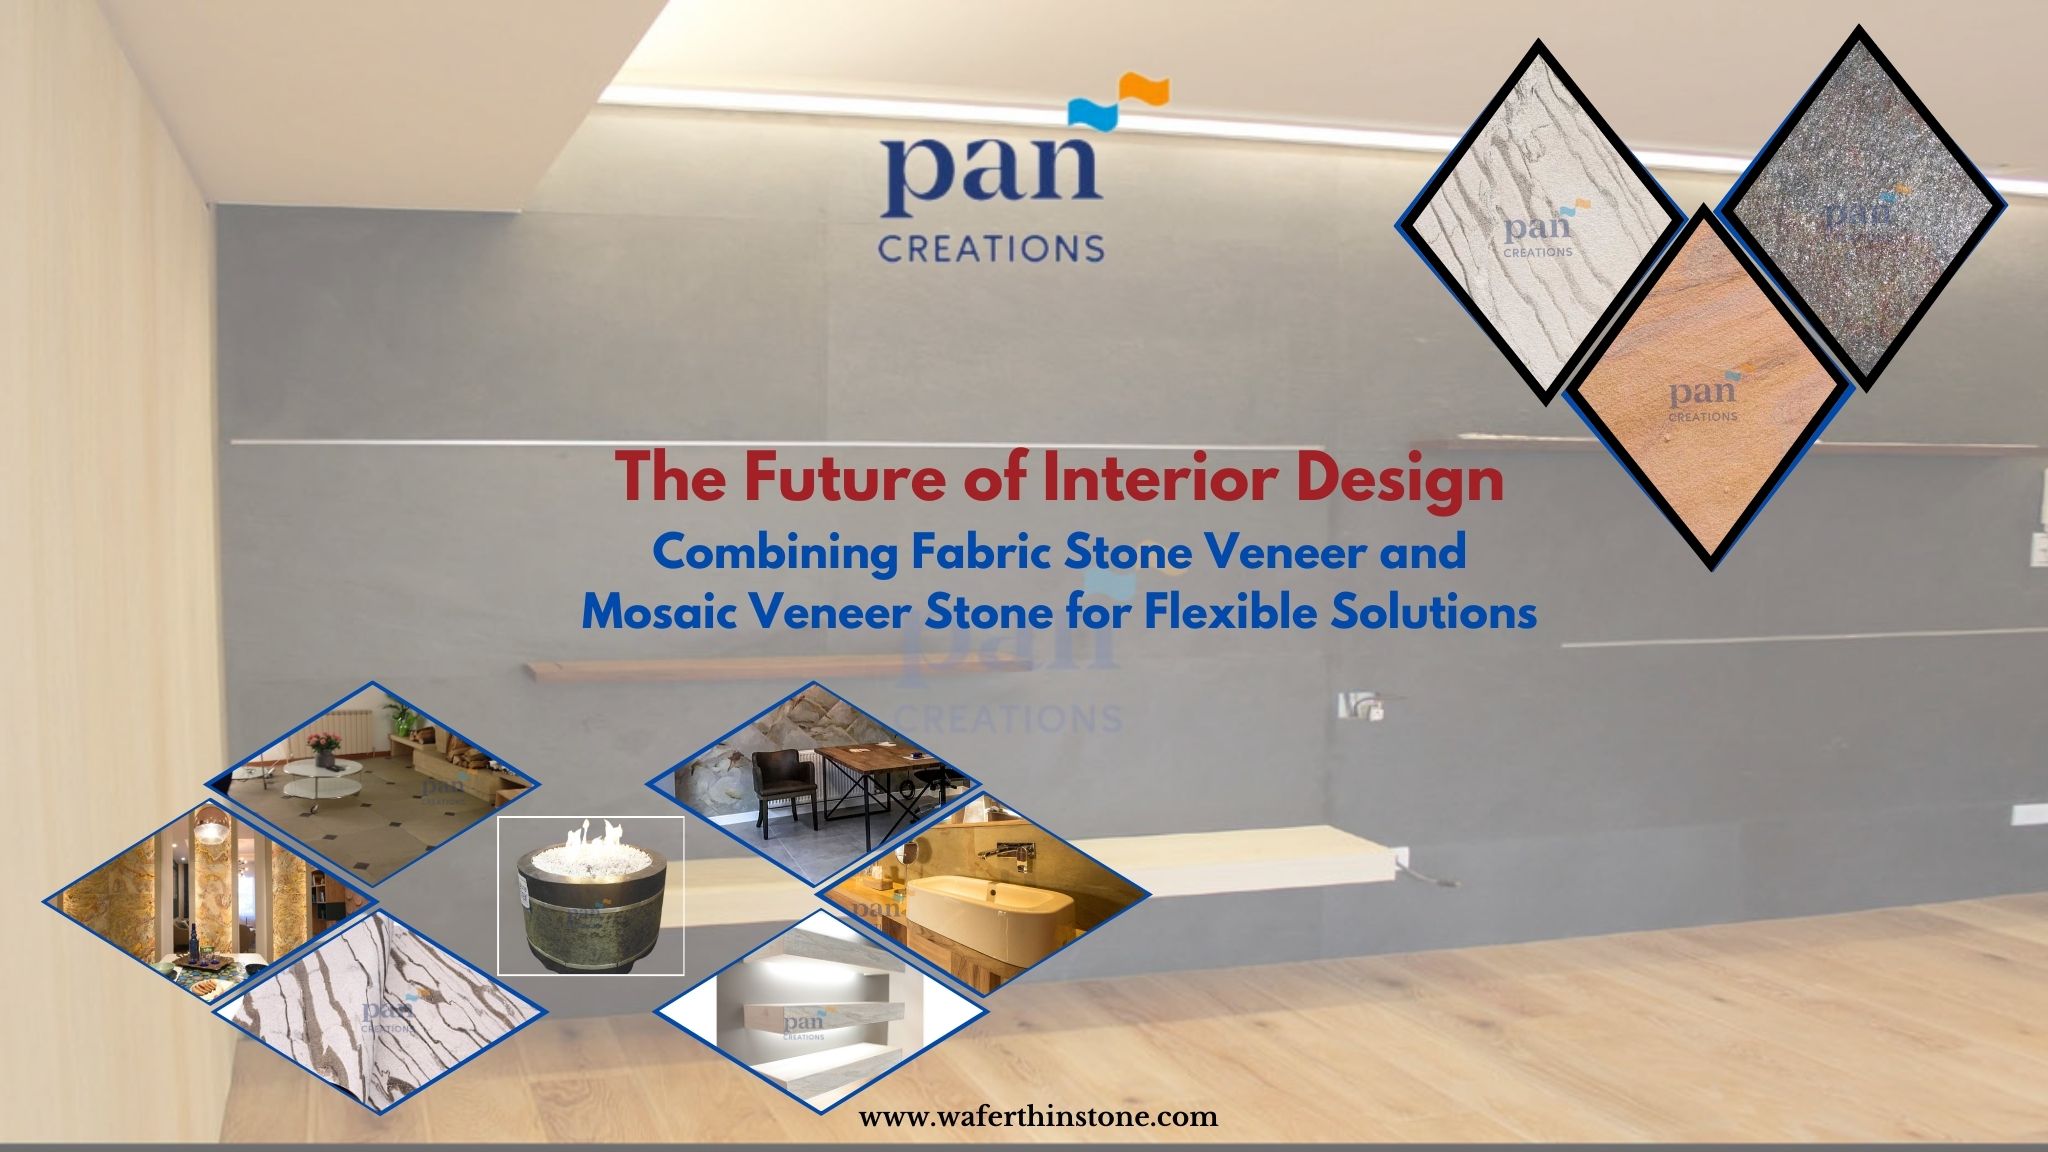 The Future of Interior Design: Combining Fabric Stone Veneer and Mosaic Veneer Stone for Flexible Solutions